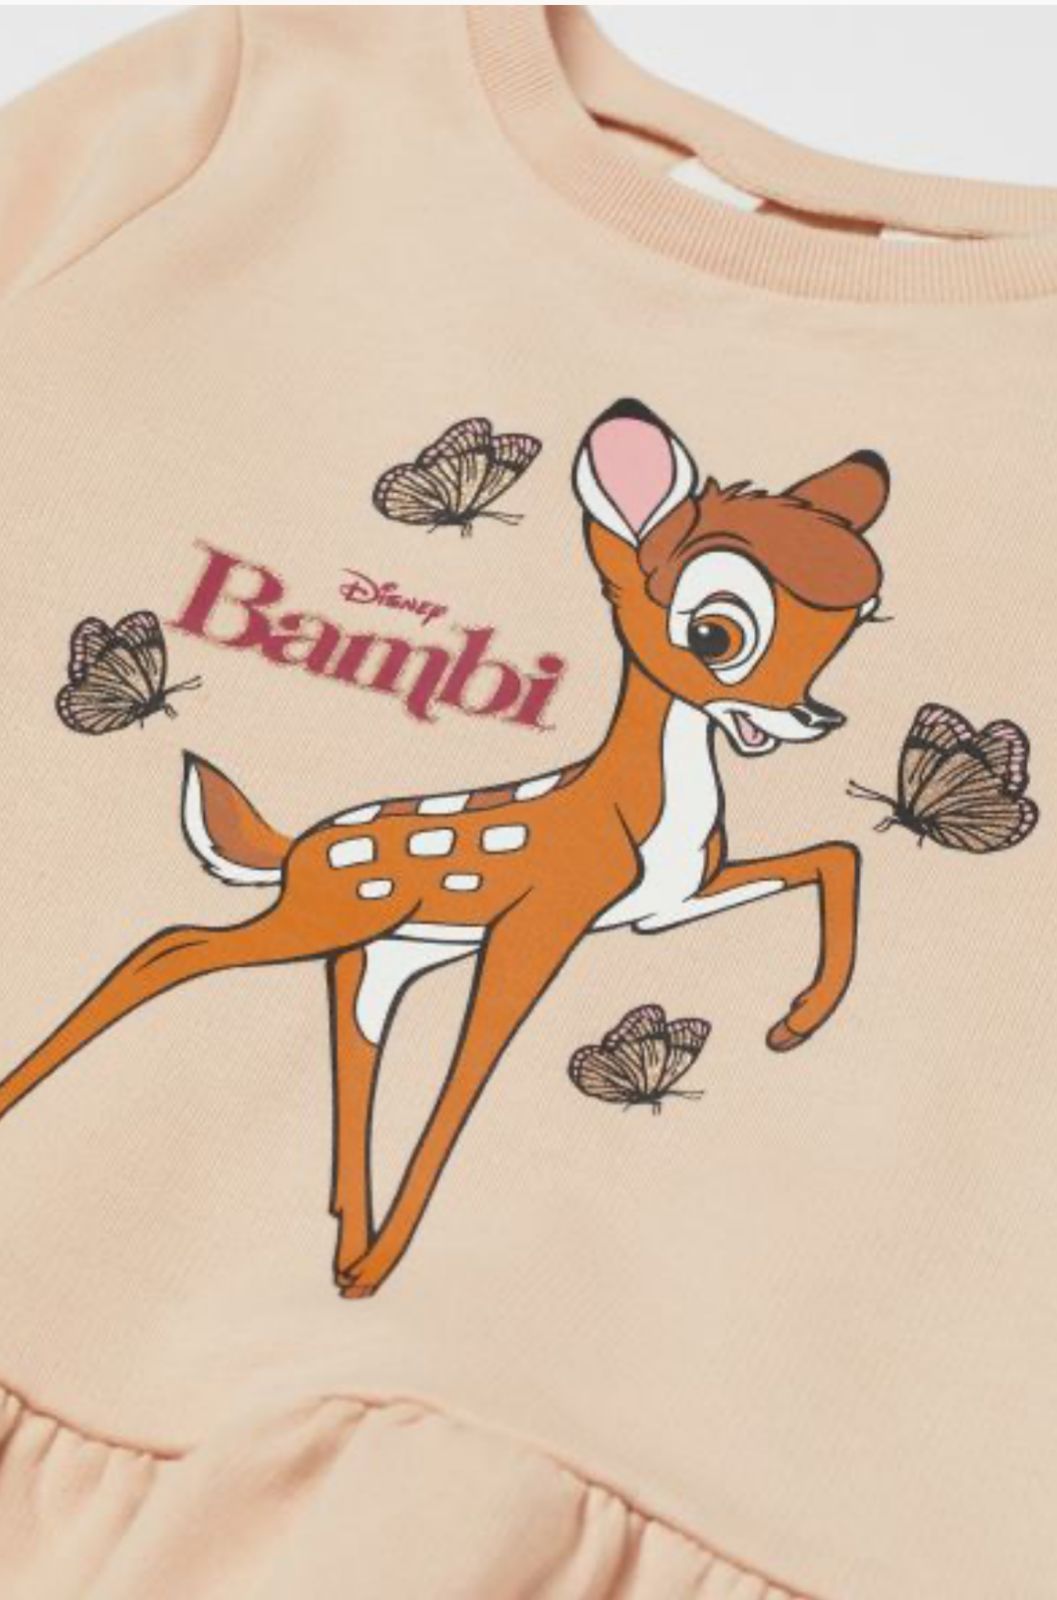 BAMBI outfit